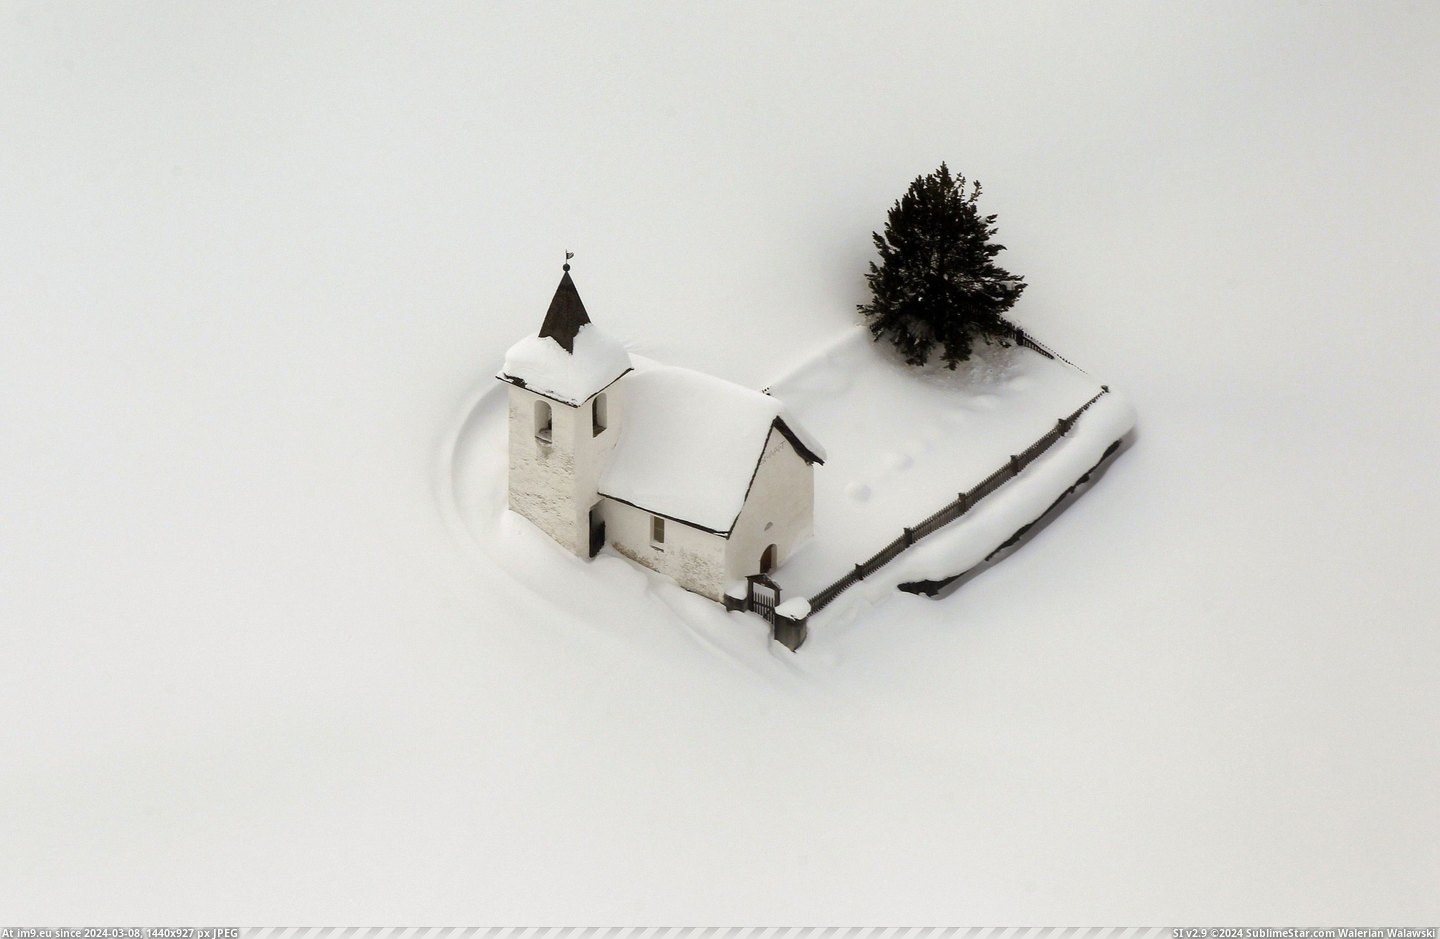 #Snow #Church #Jenisberg #Switzerland #Surrounded [Pics] A little church in Jenisberg, Switzerland, surrounded by snow. Pic. (Image of album My r/PICS favs))